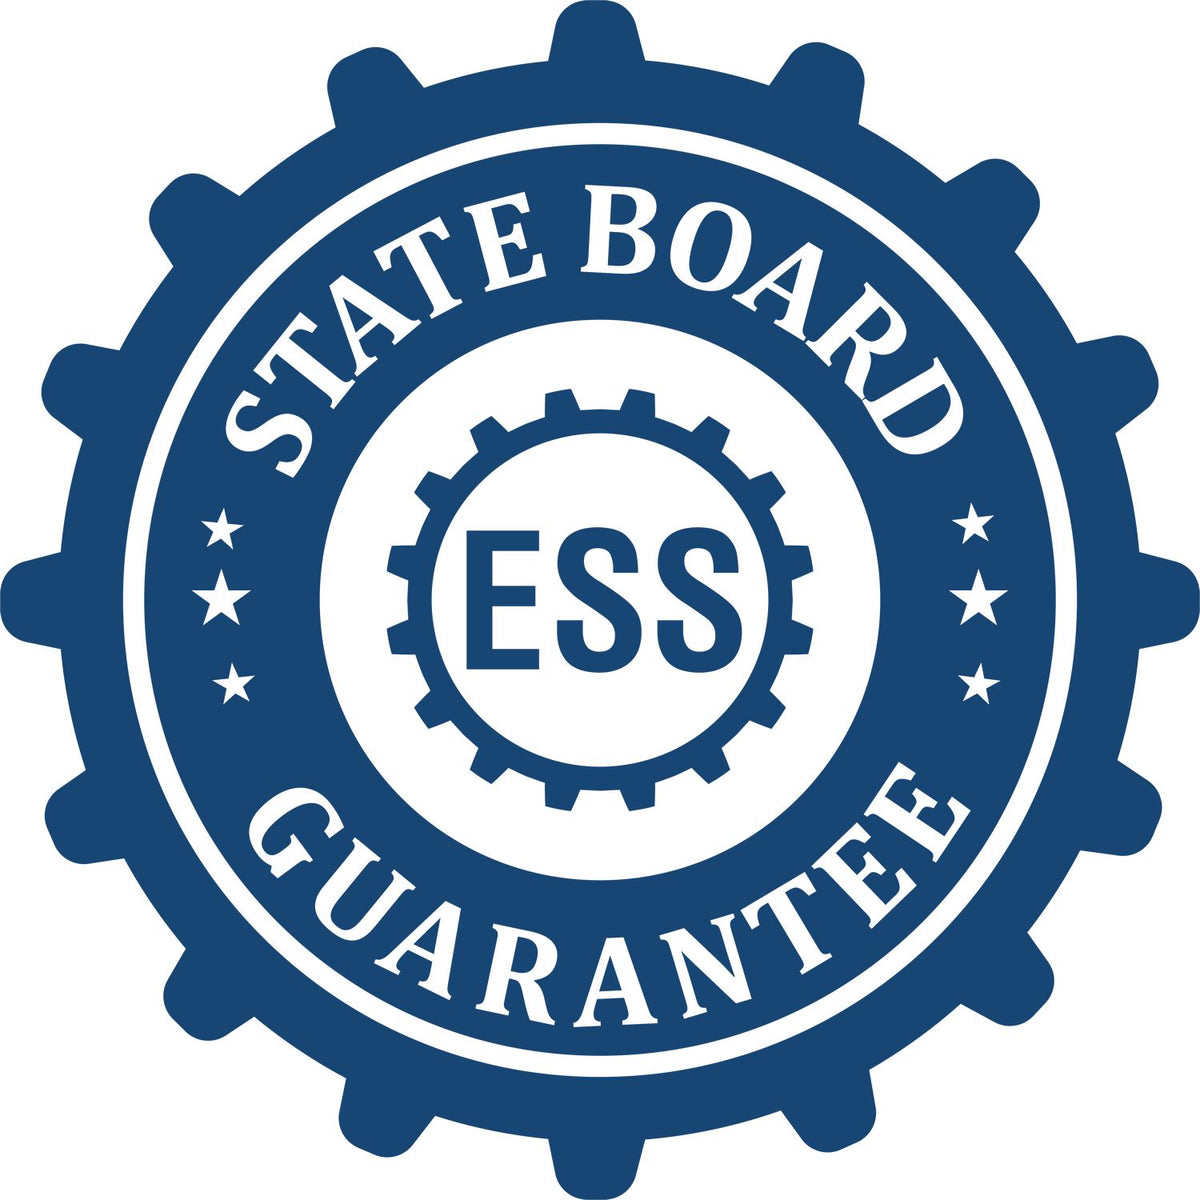 An emblem in a gear shape illustrating a state board guarantee for the State of Wyoming Extended Long Reach Geologist Seal